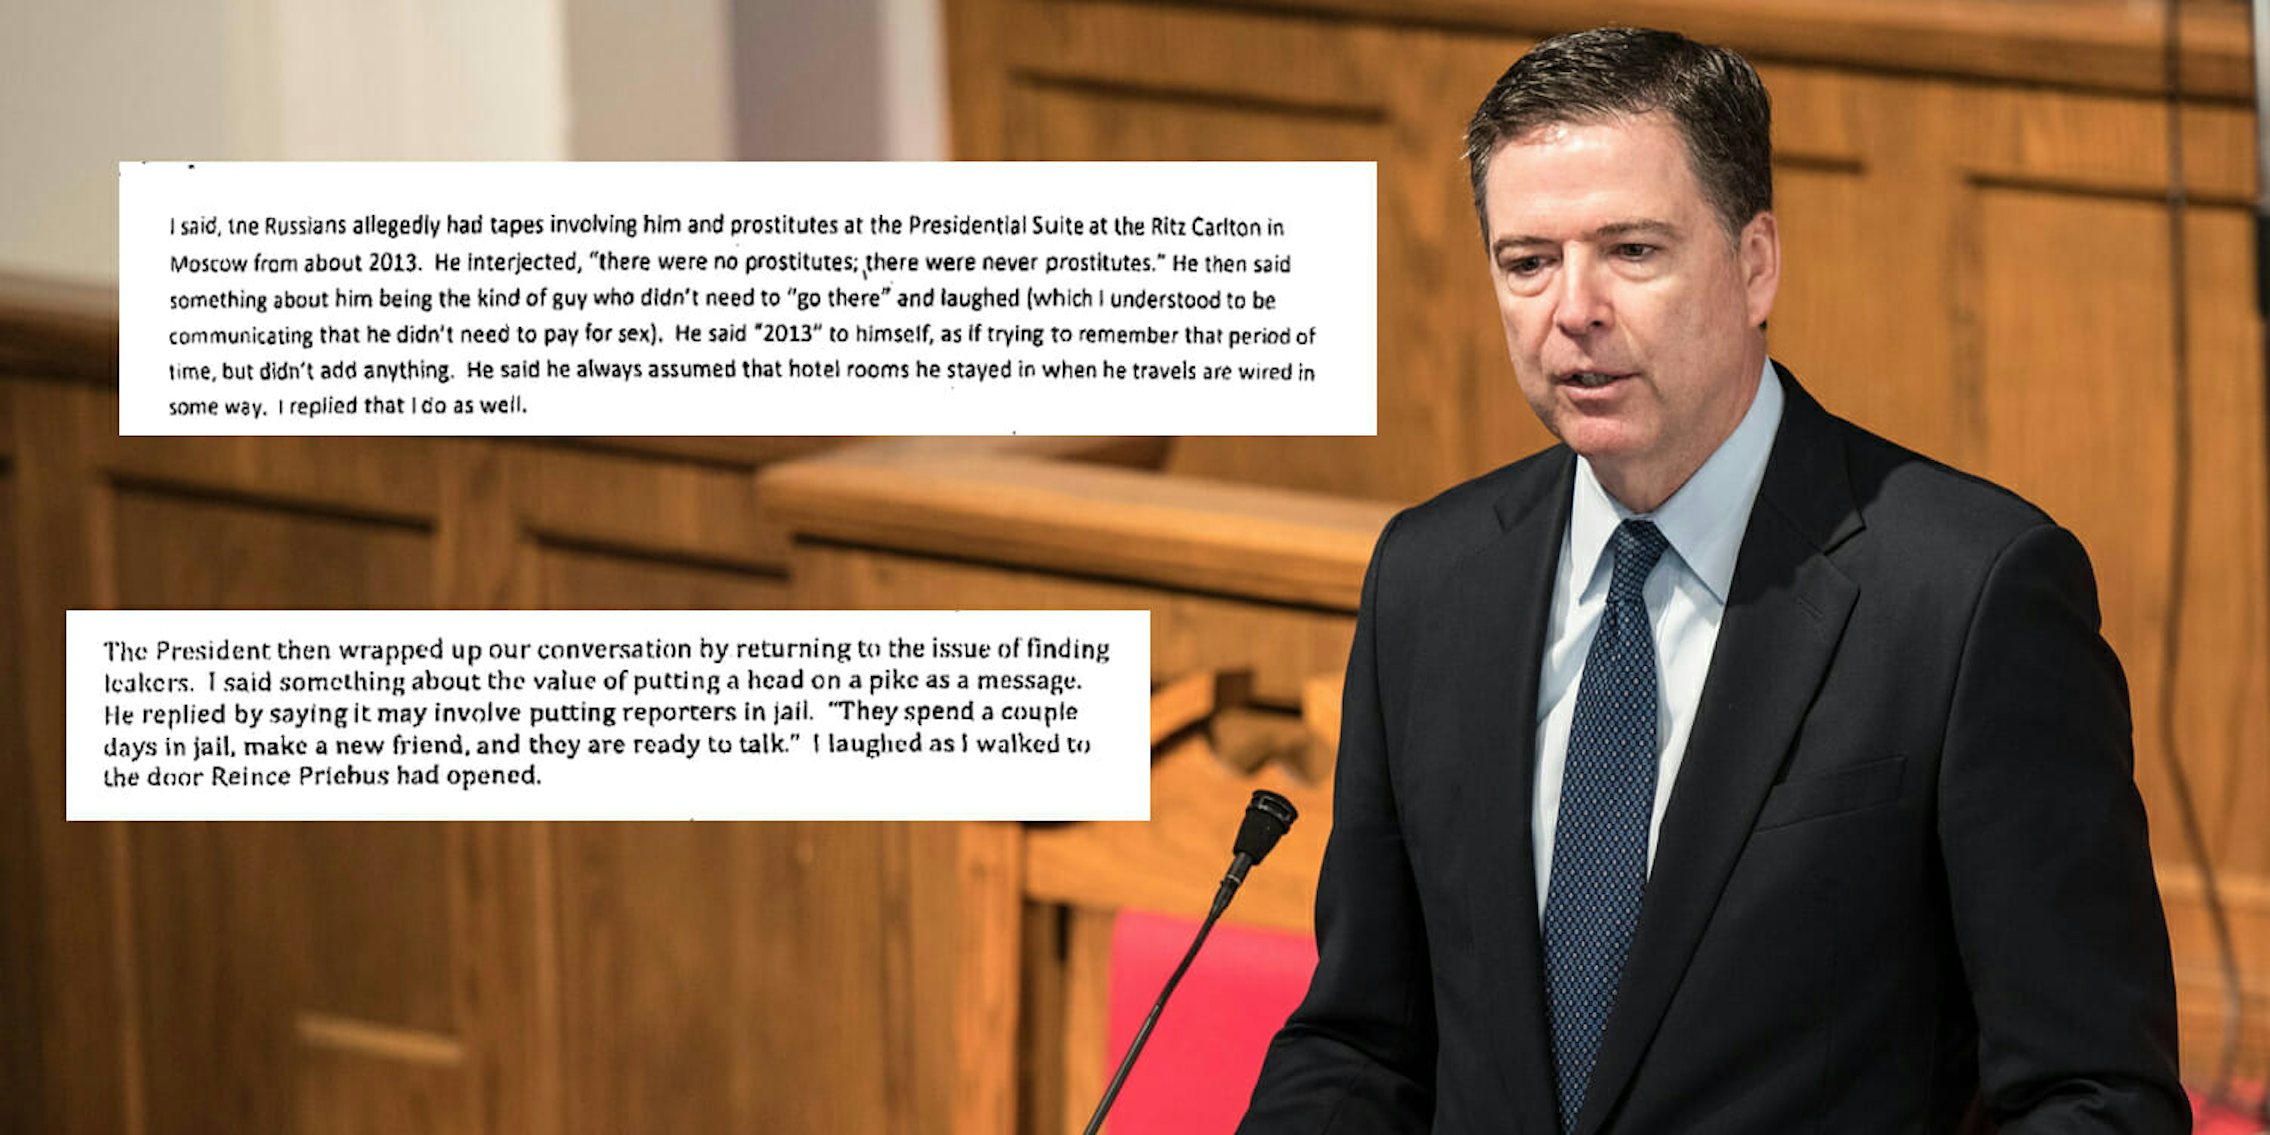 Memos written by former FBI Director James Comey were released to the public late Thursday, and they mostly back up comments he has made about his interactions with President Donald Trump since he was abruptly fired last year.